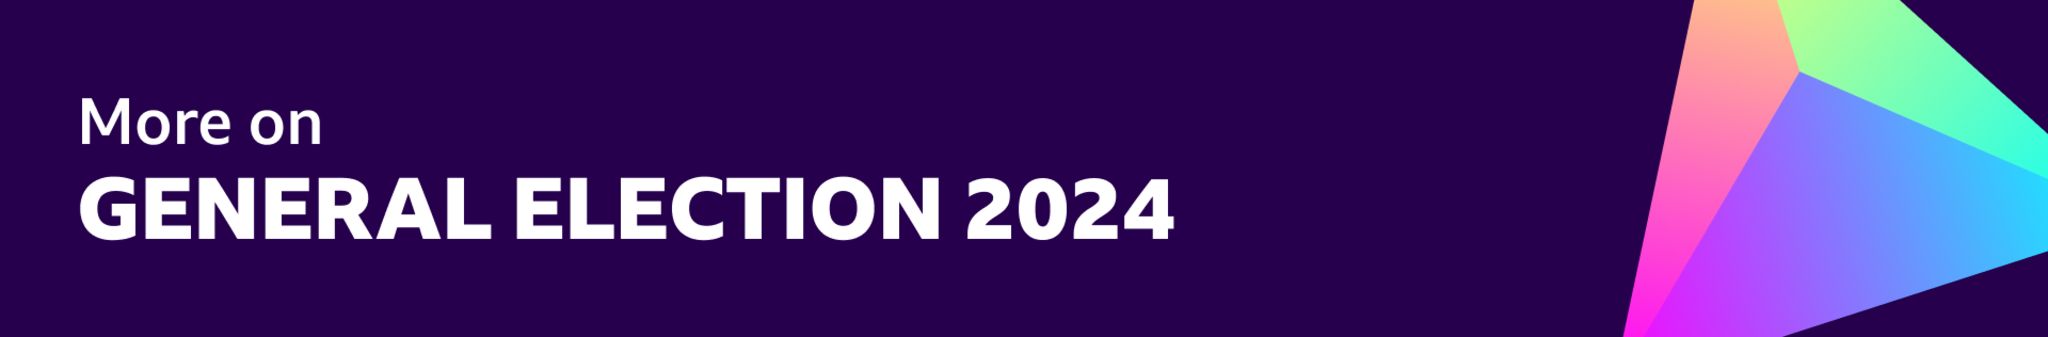 Purple BBC general election banner reading "More on general election 2024"